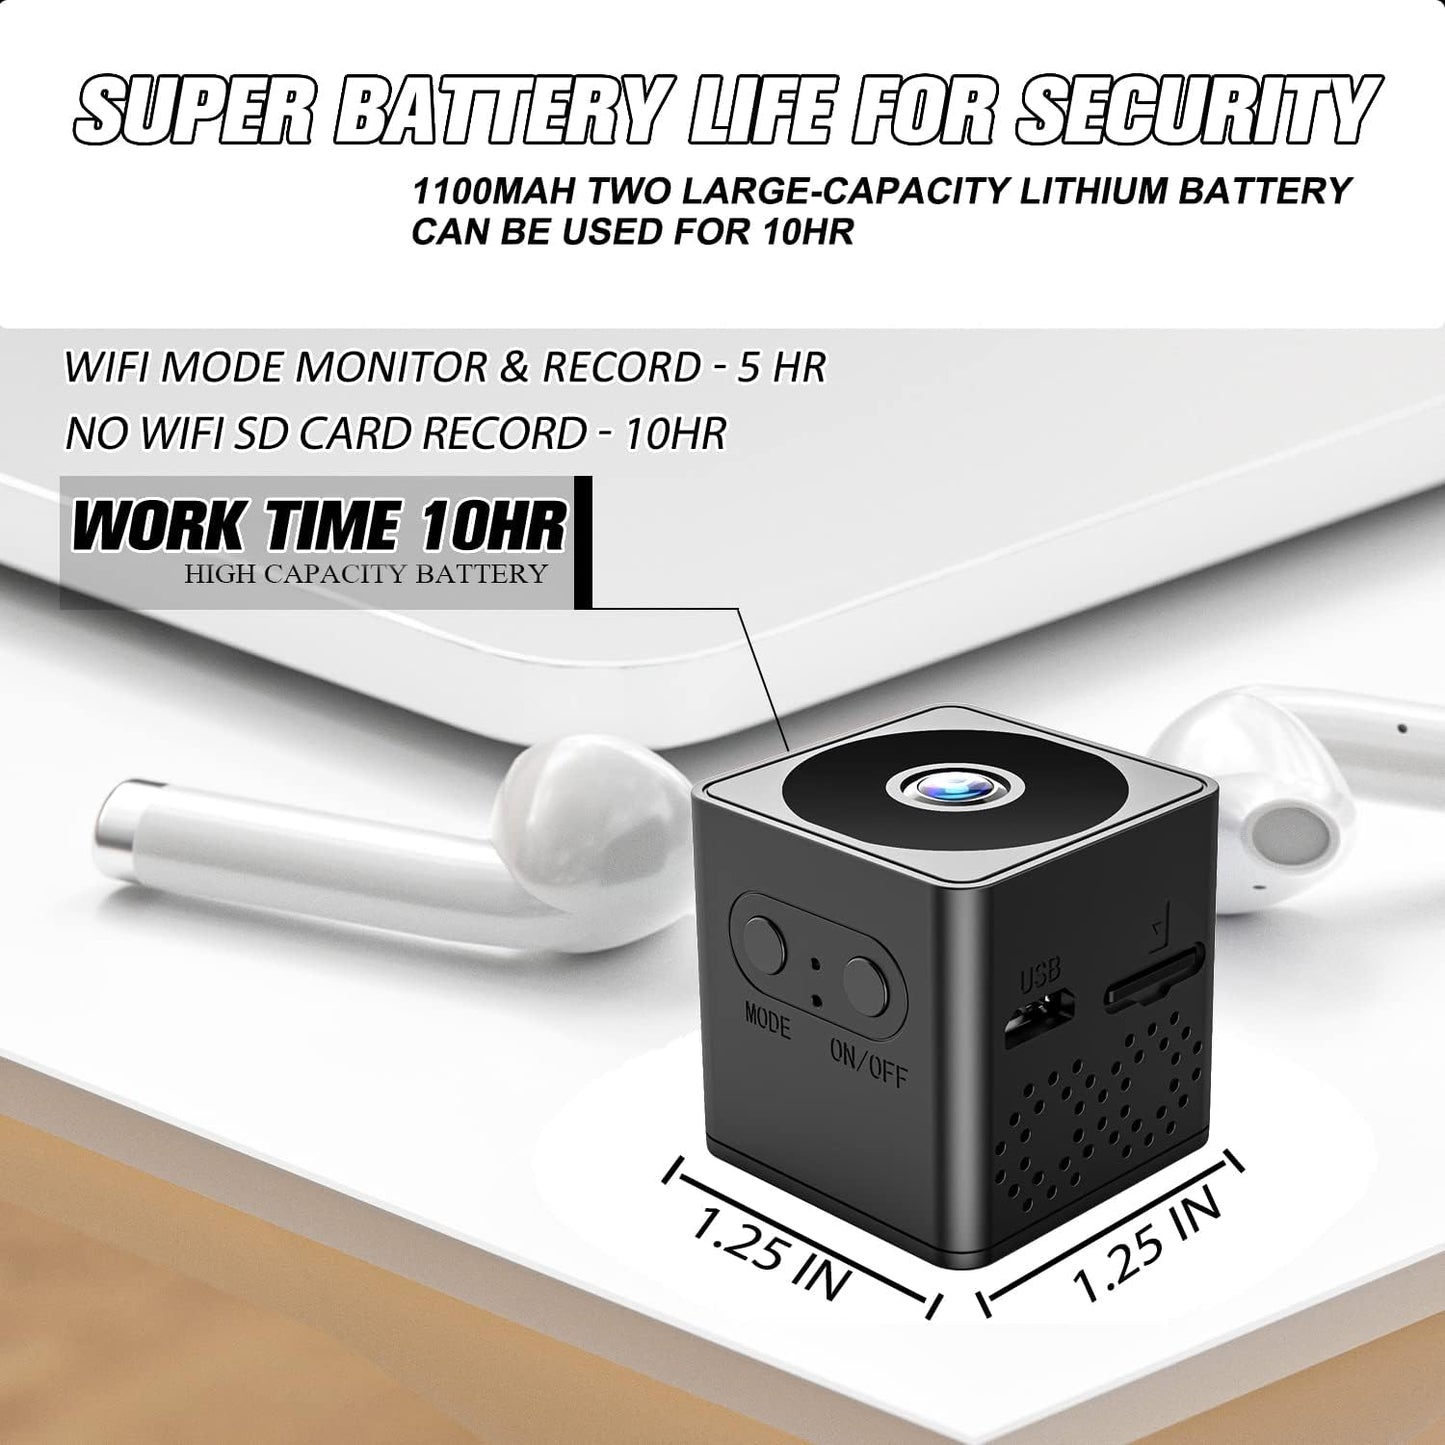 Spy Camera Wifi Hidden Camera 1080P HD Video Recording Mini Wireless Cam for Indoor Home Security Smallest Portable Baby Pet 64GB Memory 10HR Camera with Motion Detection Alarm Push Auto Night Vision